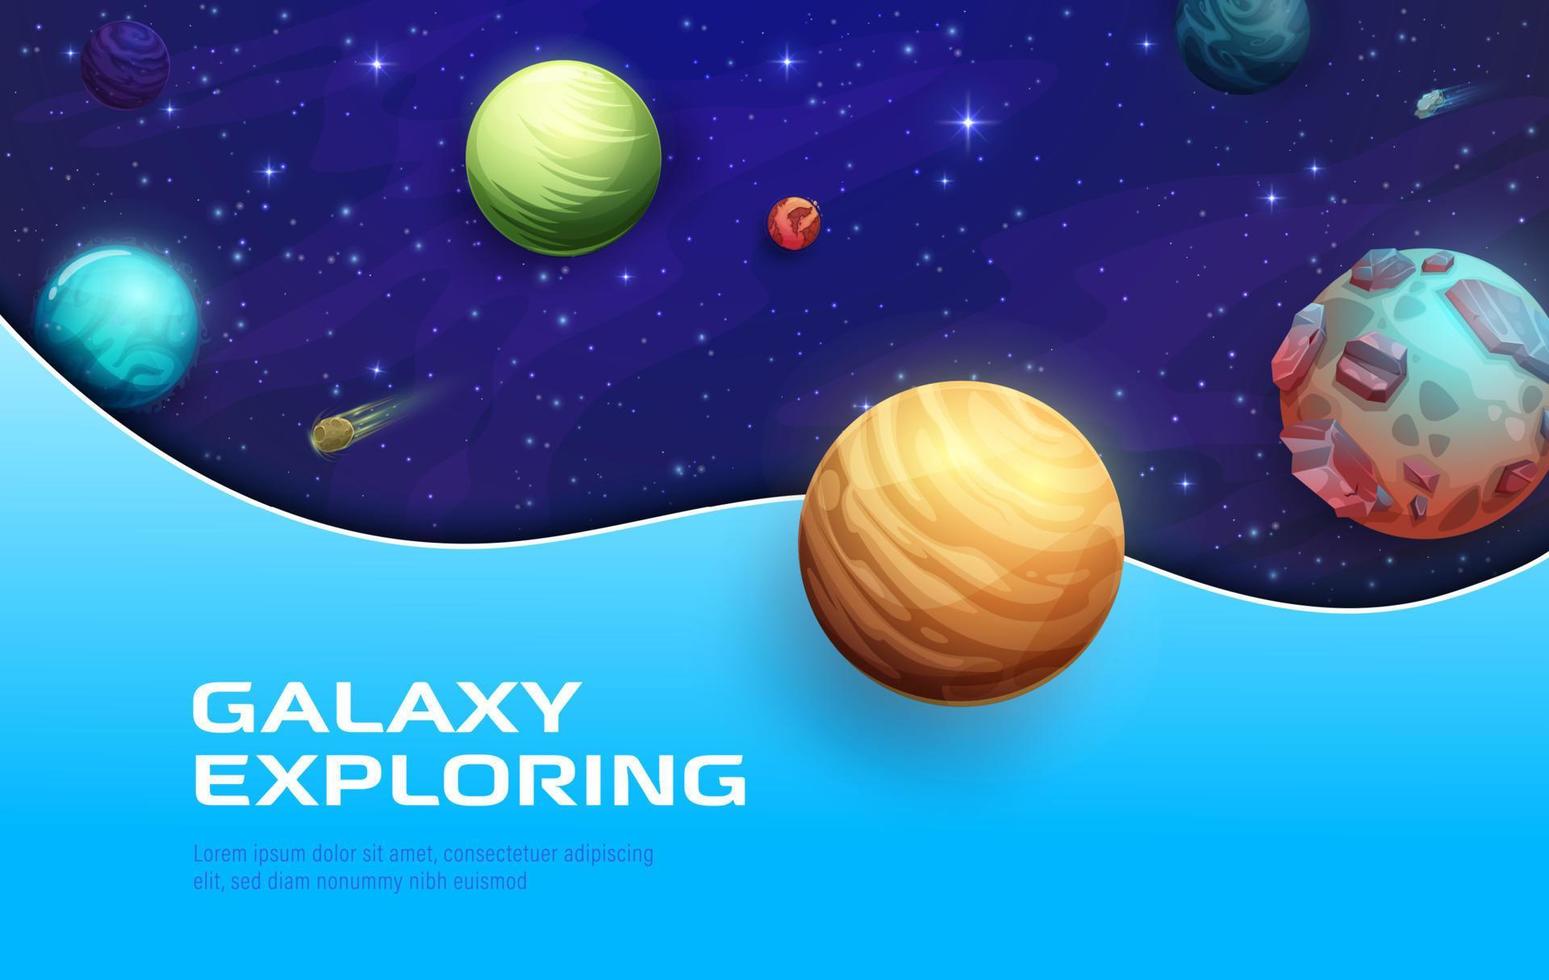 Space landing page with 3D galaxy planets, stars vector